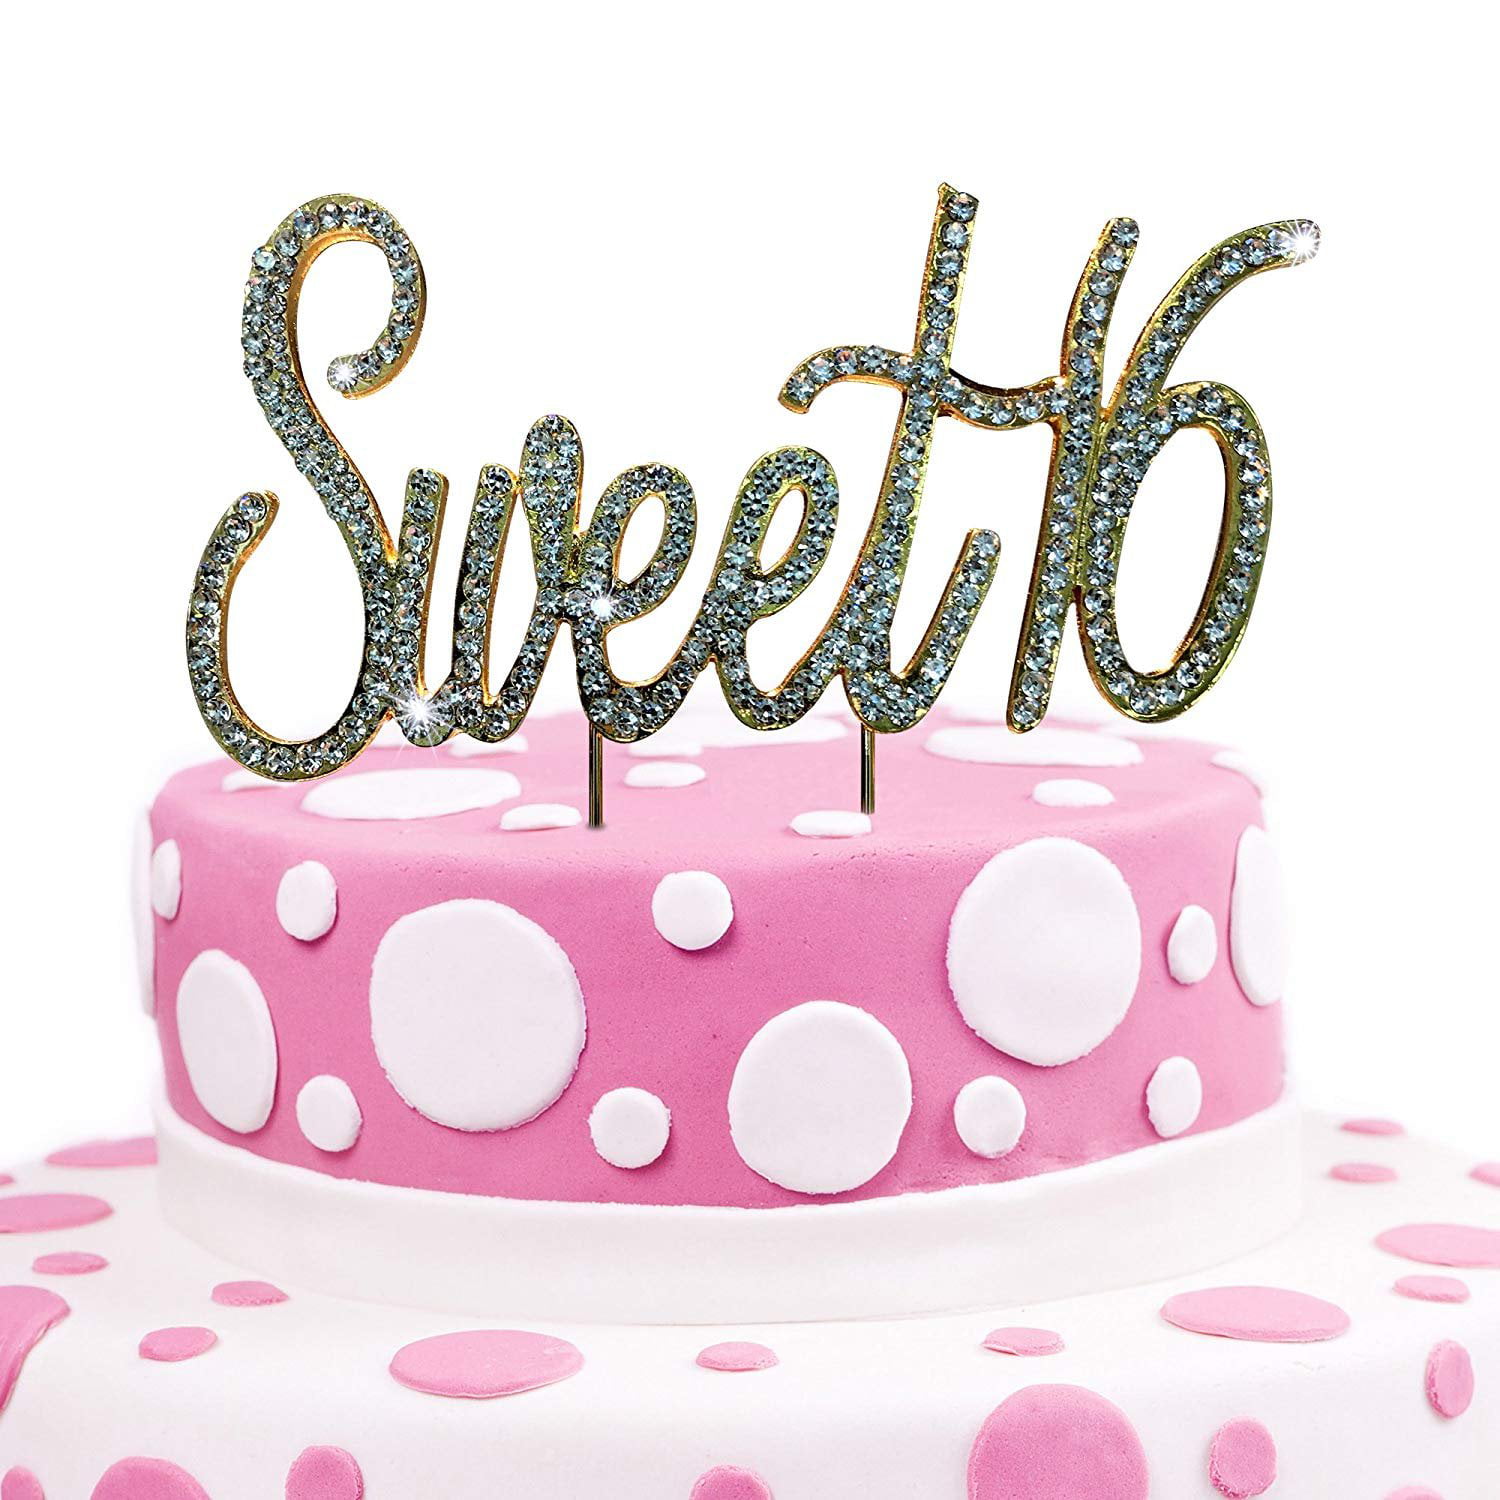 Sweet Sixteen 16 Silver Rhinestone Crystal Birthday Party Cake Topper Number 16 